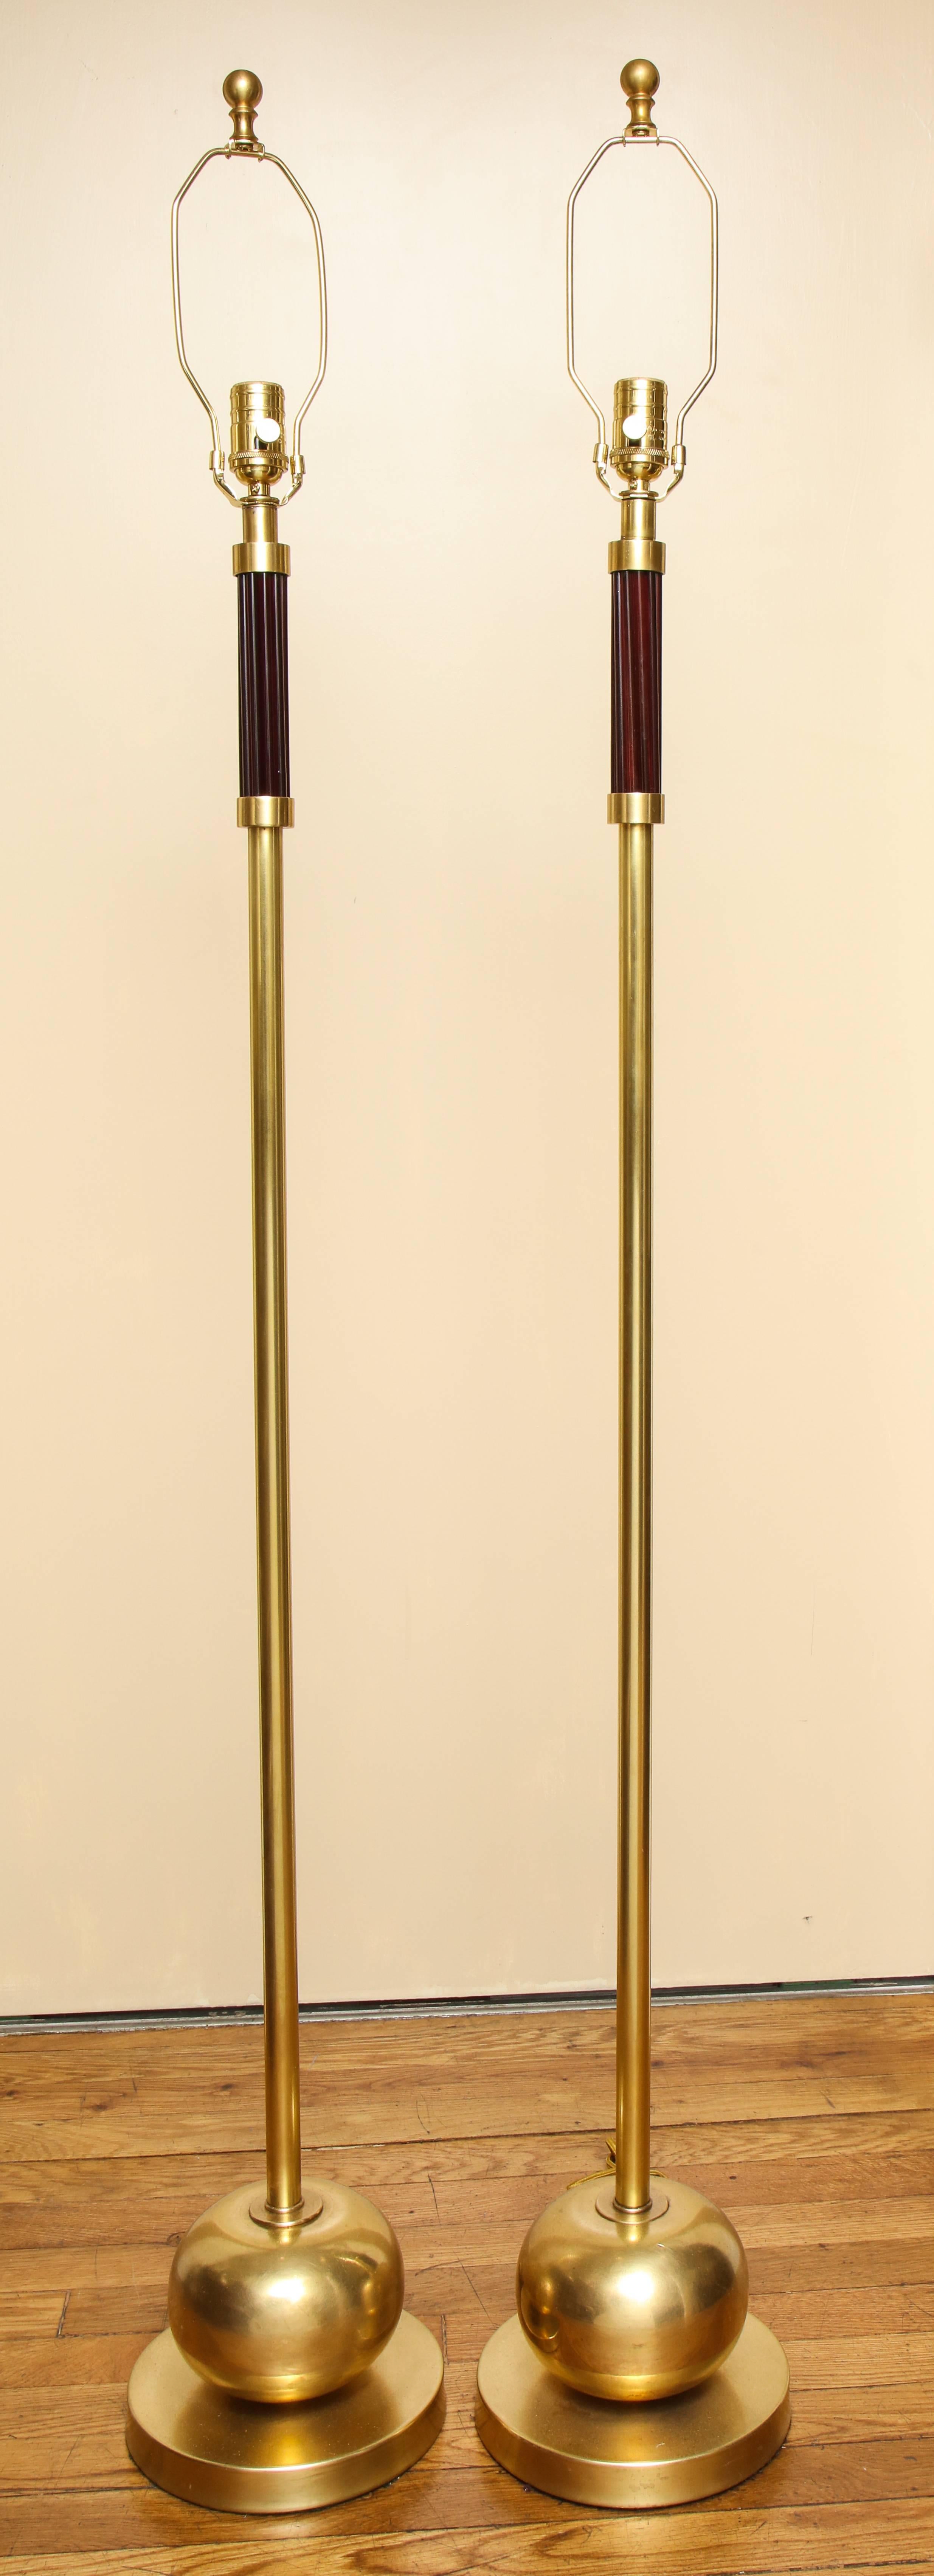 Pair of French Art Deco Standing Lamps 1